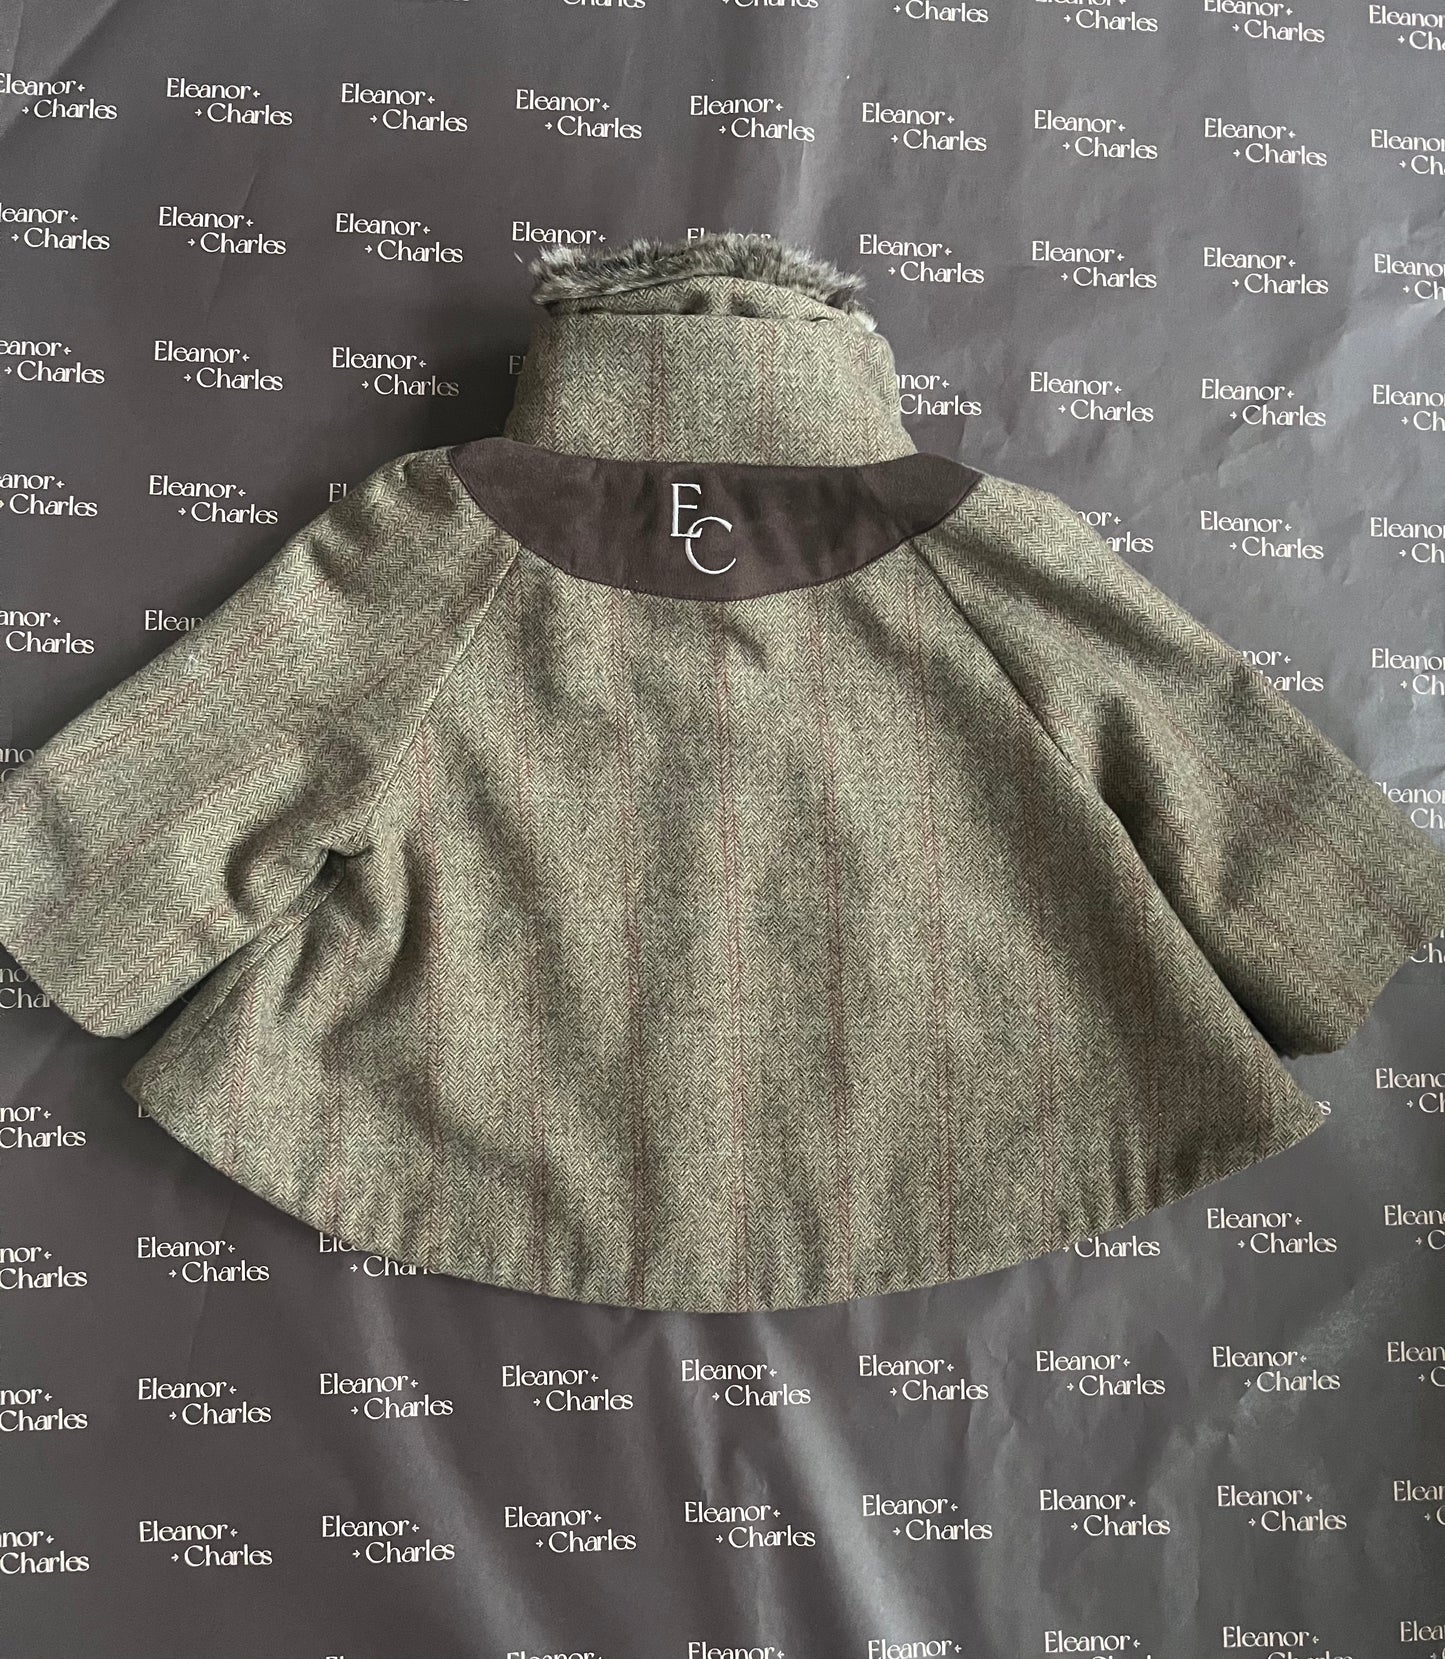 Second Hand Tweed Cape 1-2 years Grade A